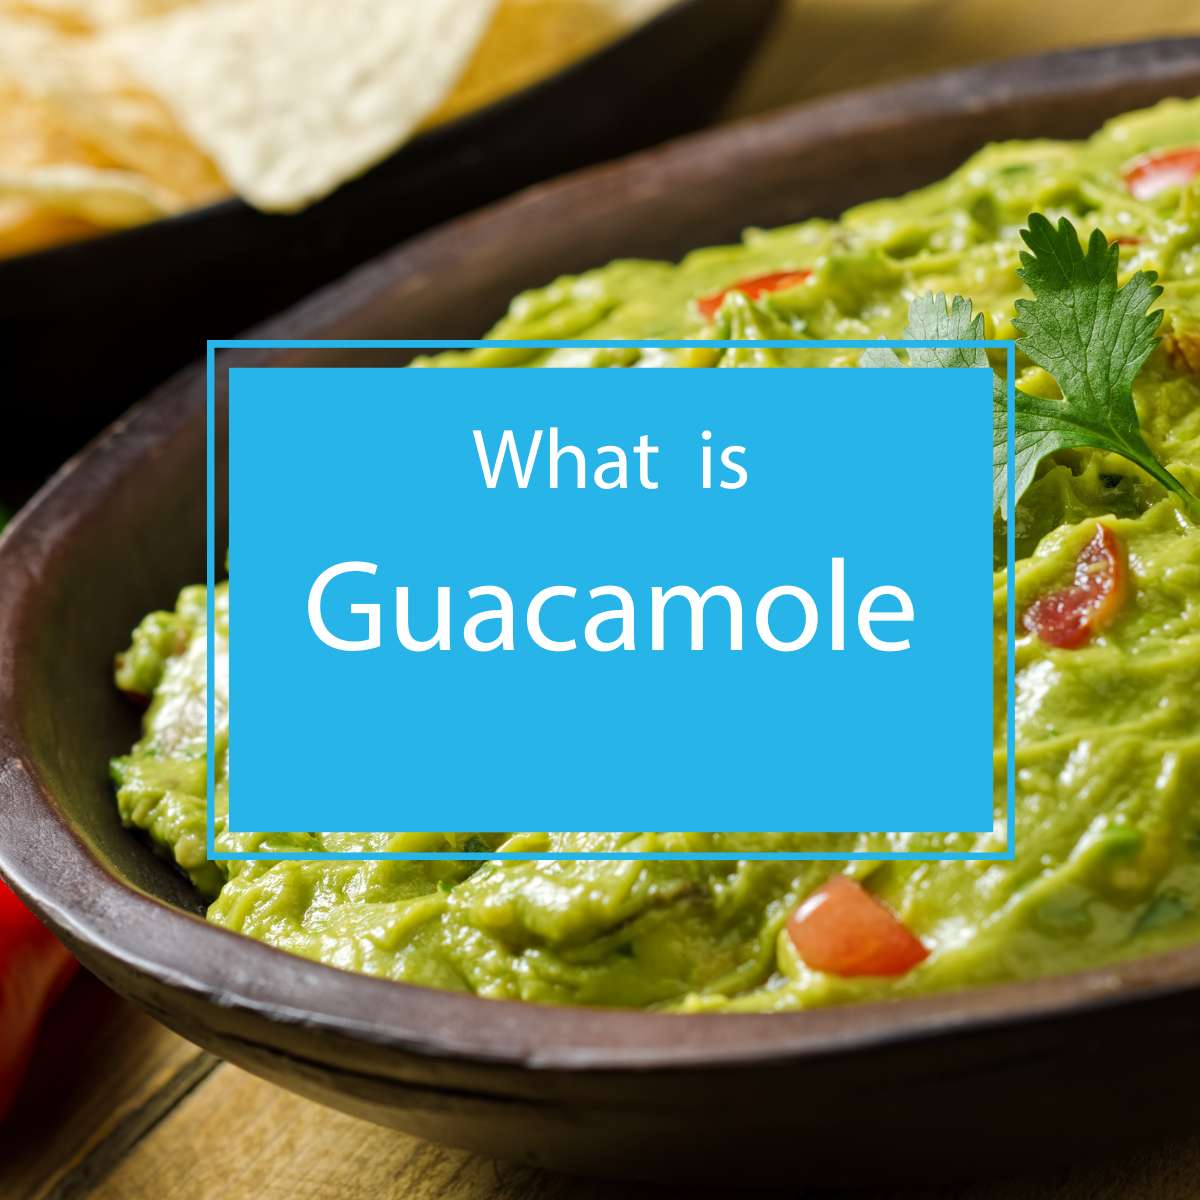 What is Guacamole